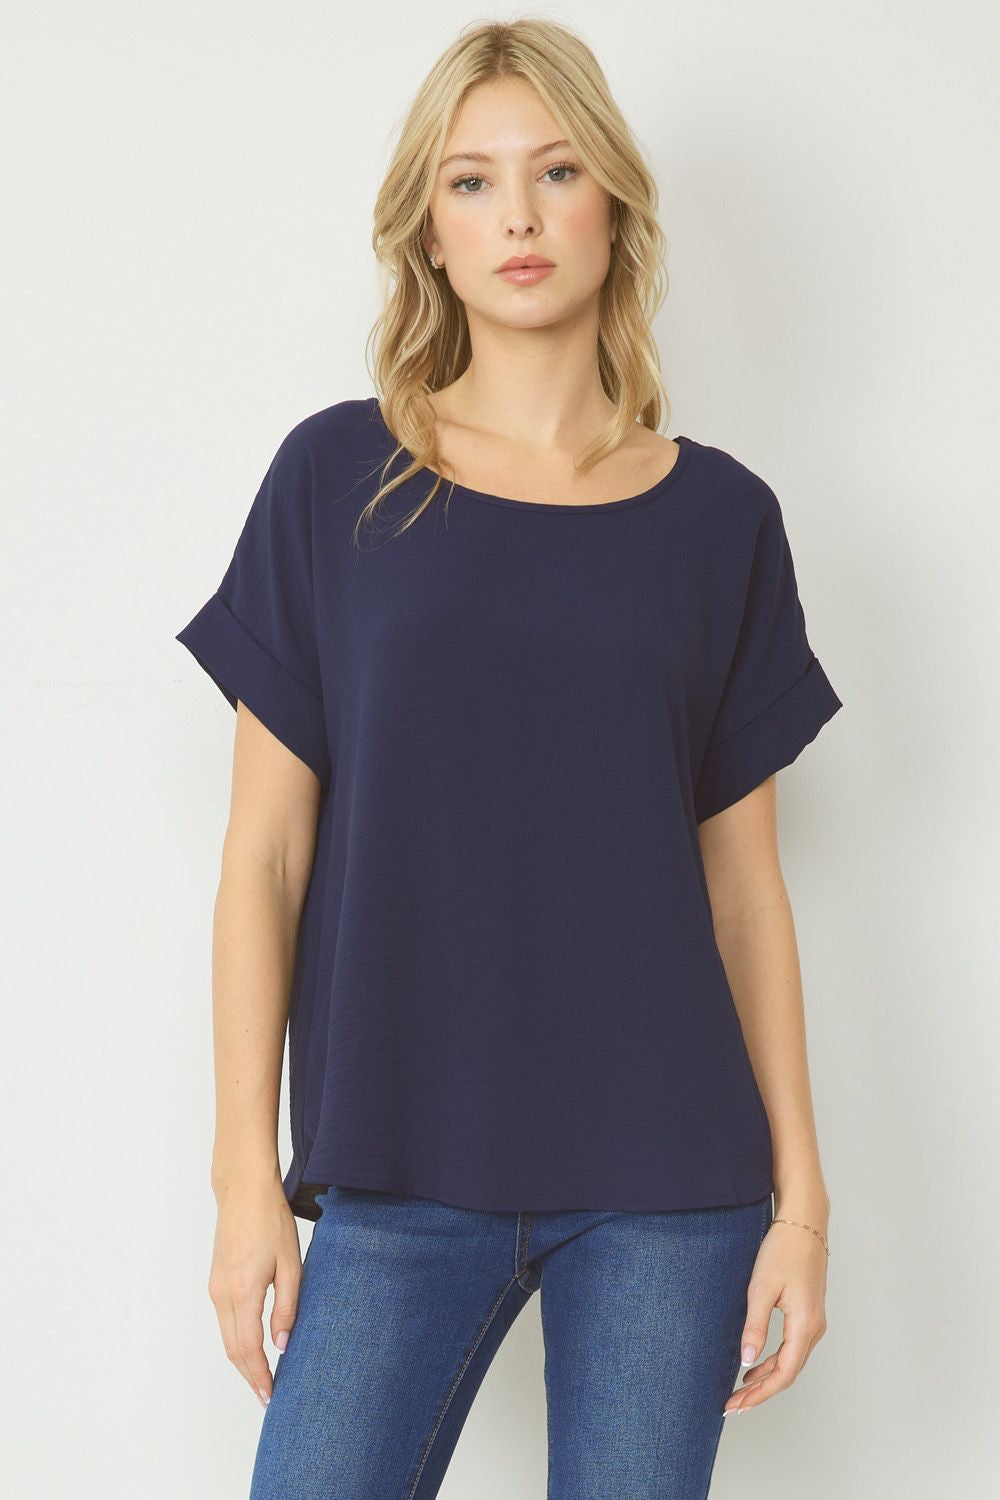 Navy scoop-neck top featuring permanent rolled sleeve detail and an asymmetrical hem.